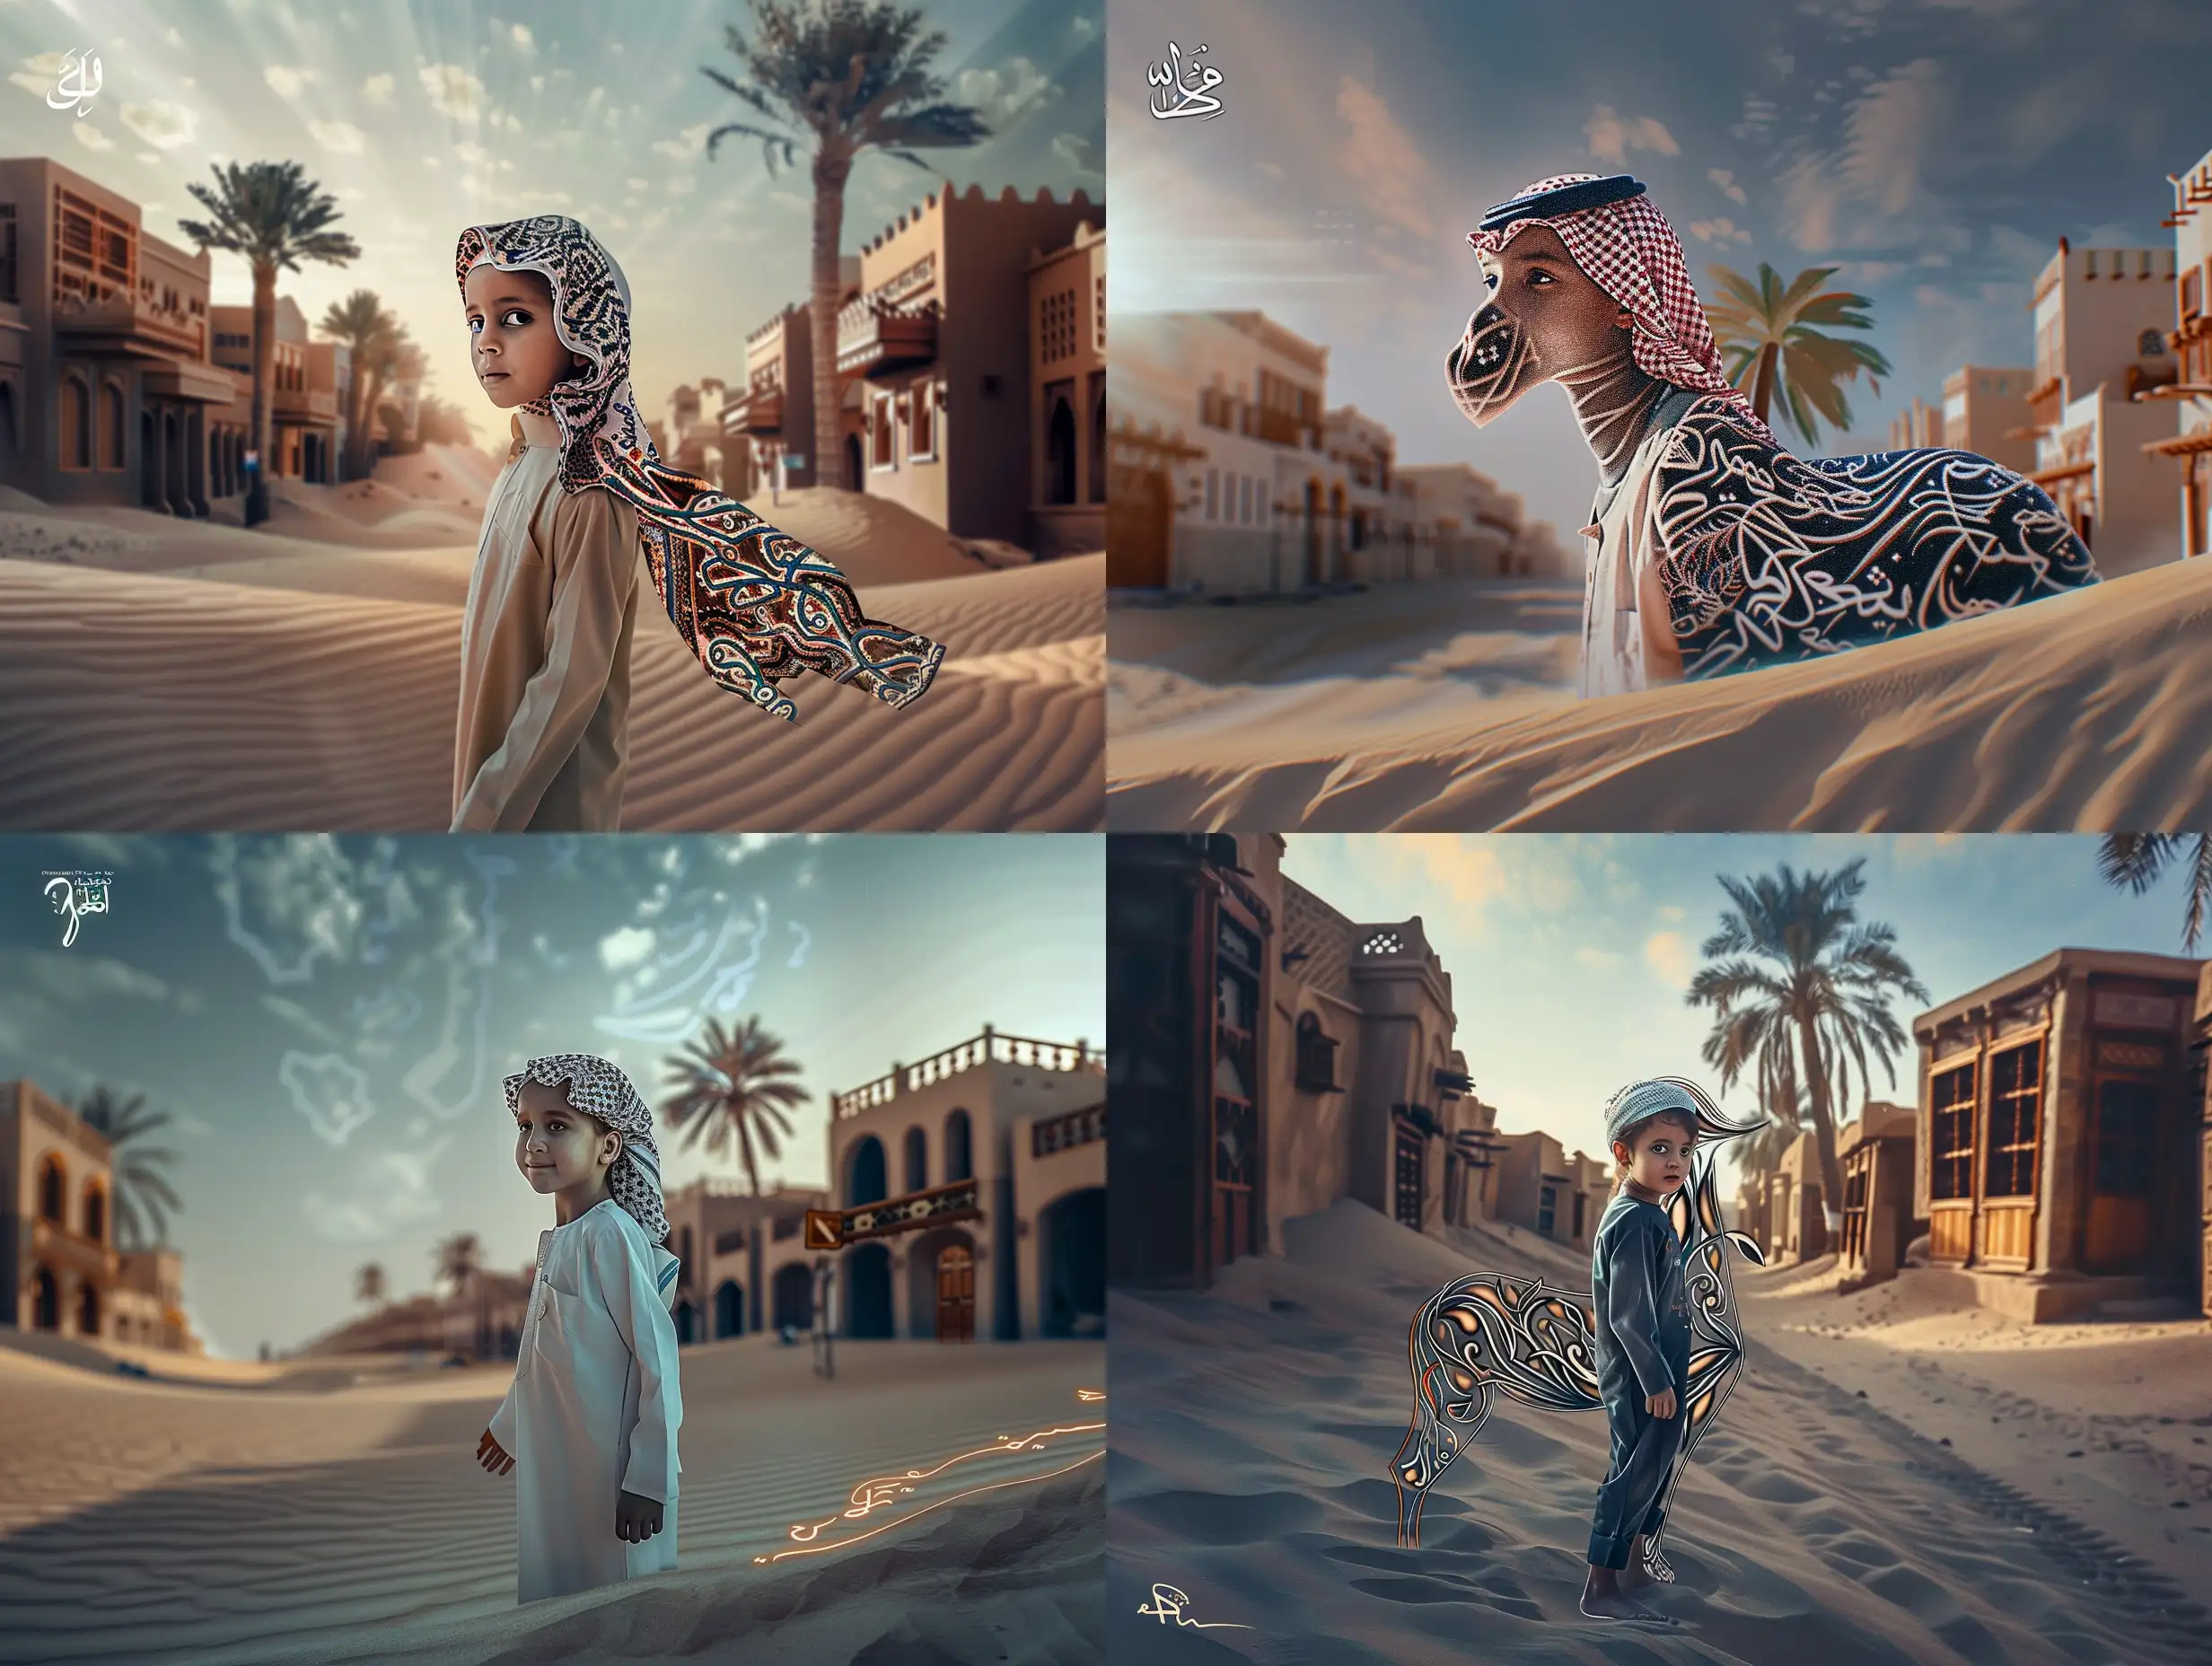 A realistic, cinematic-style image of a Saudi child standing on a street in the historic Jeddah area, surrounded by houses in the old Hejazi urban style, with wood veneers on the windows of the houses and palm trees near the houses, looking with a slight, innocent smile.
, Landscape, Marker, Normal perspective, Coastal Beach, Medium Format Camera, Natural Light, Delight,